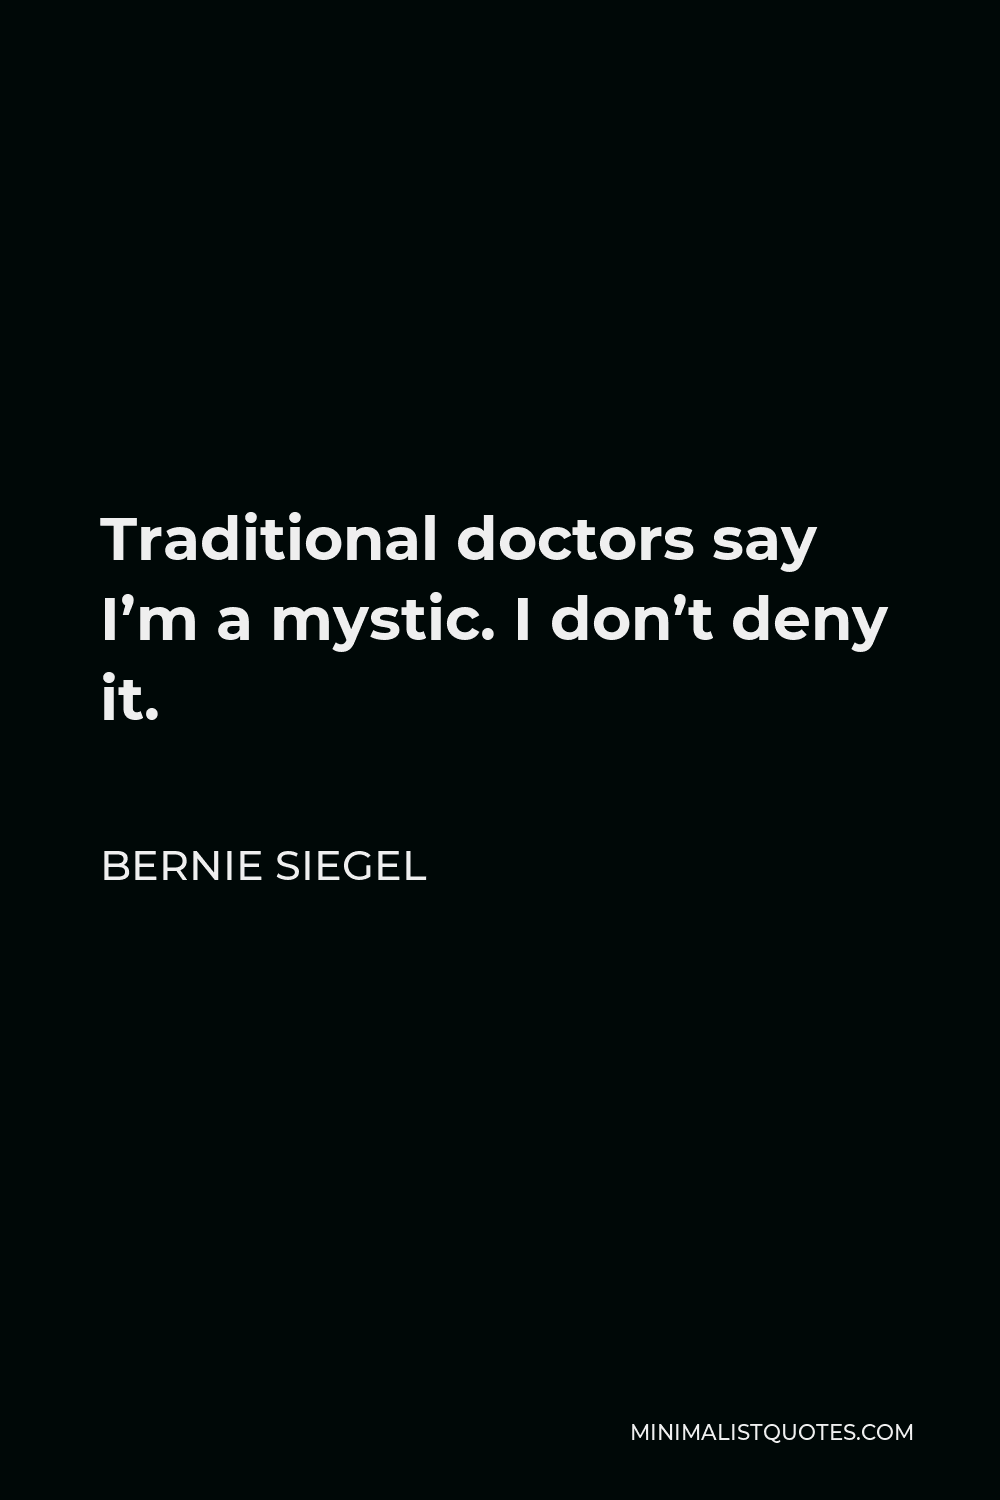 Bernie Siegel Quote - Traditional doctors say I’m a mystic. I don’t deny it.